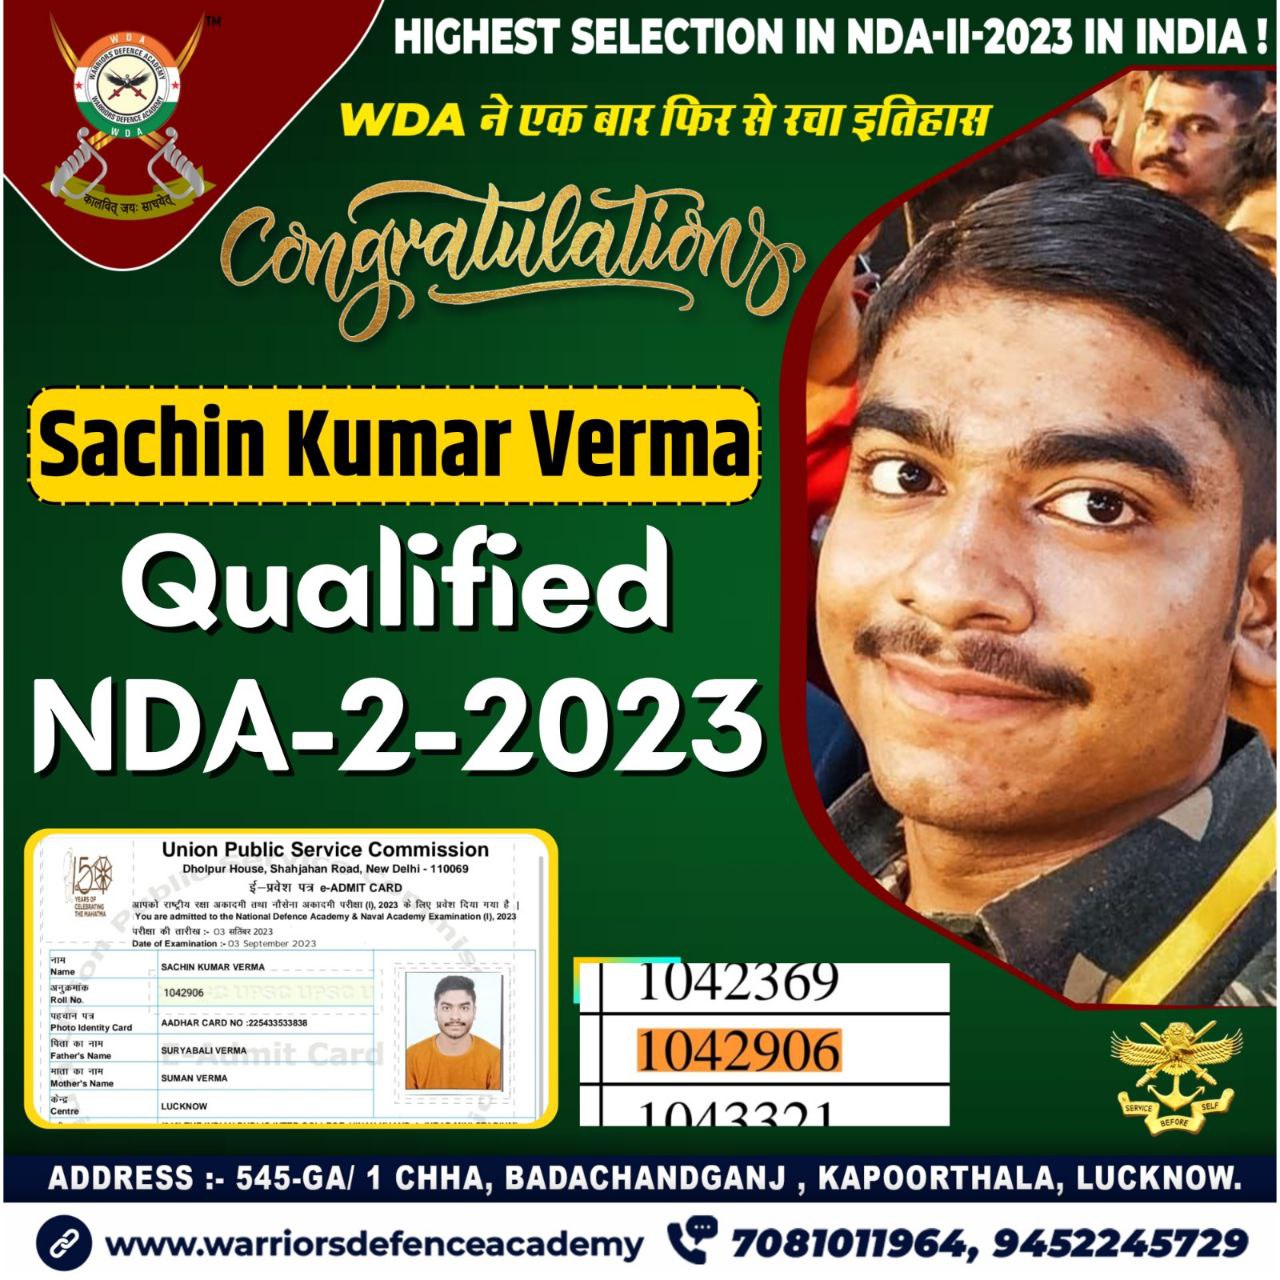 NDA-2 2023 Result Declared: Check Official PDF Here | Warriors Defence Academy | Best NDA Coaching in Lucknow